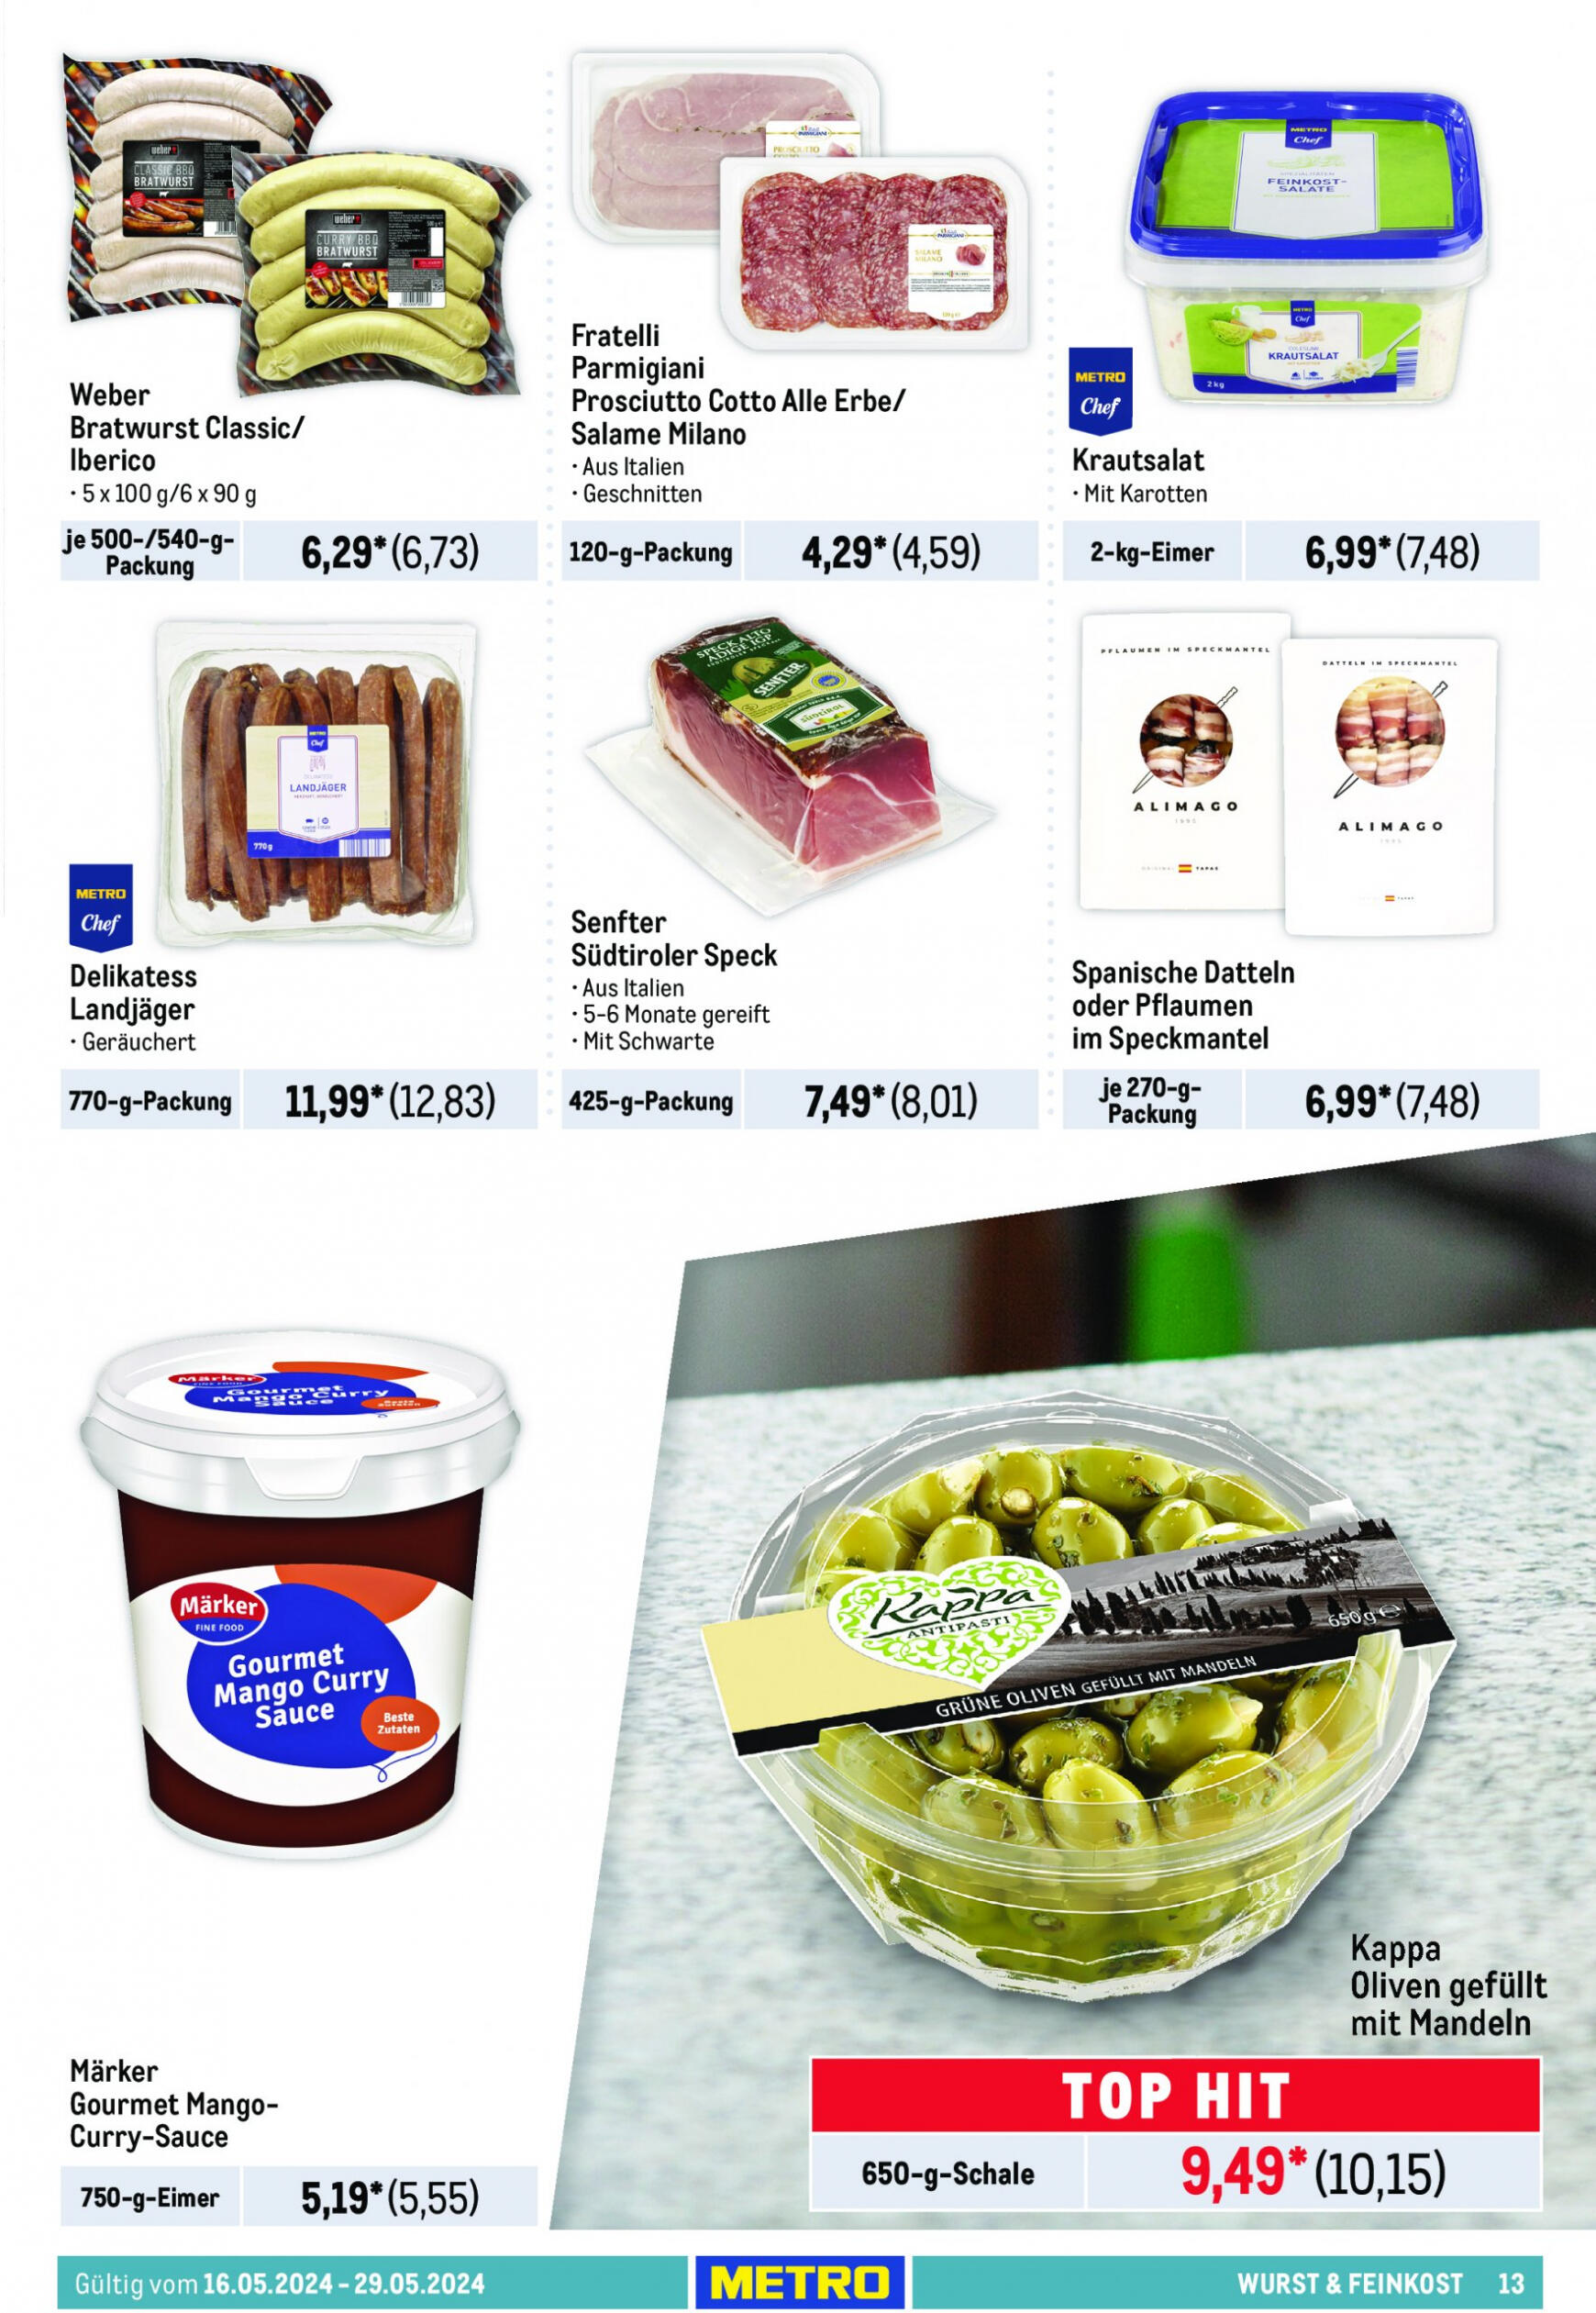 metro - Flyer Metro - Food-NonFood aktuell 16.05. - 29.05. - page: 13